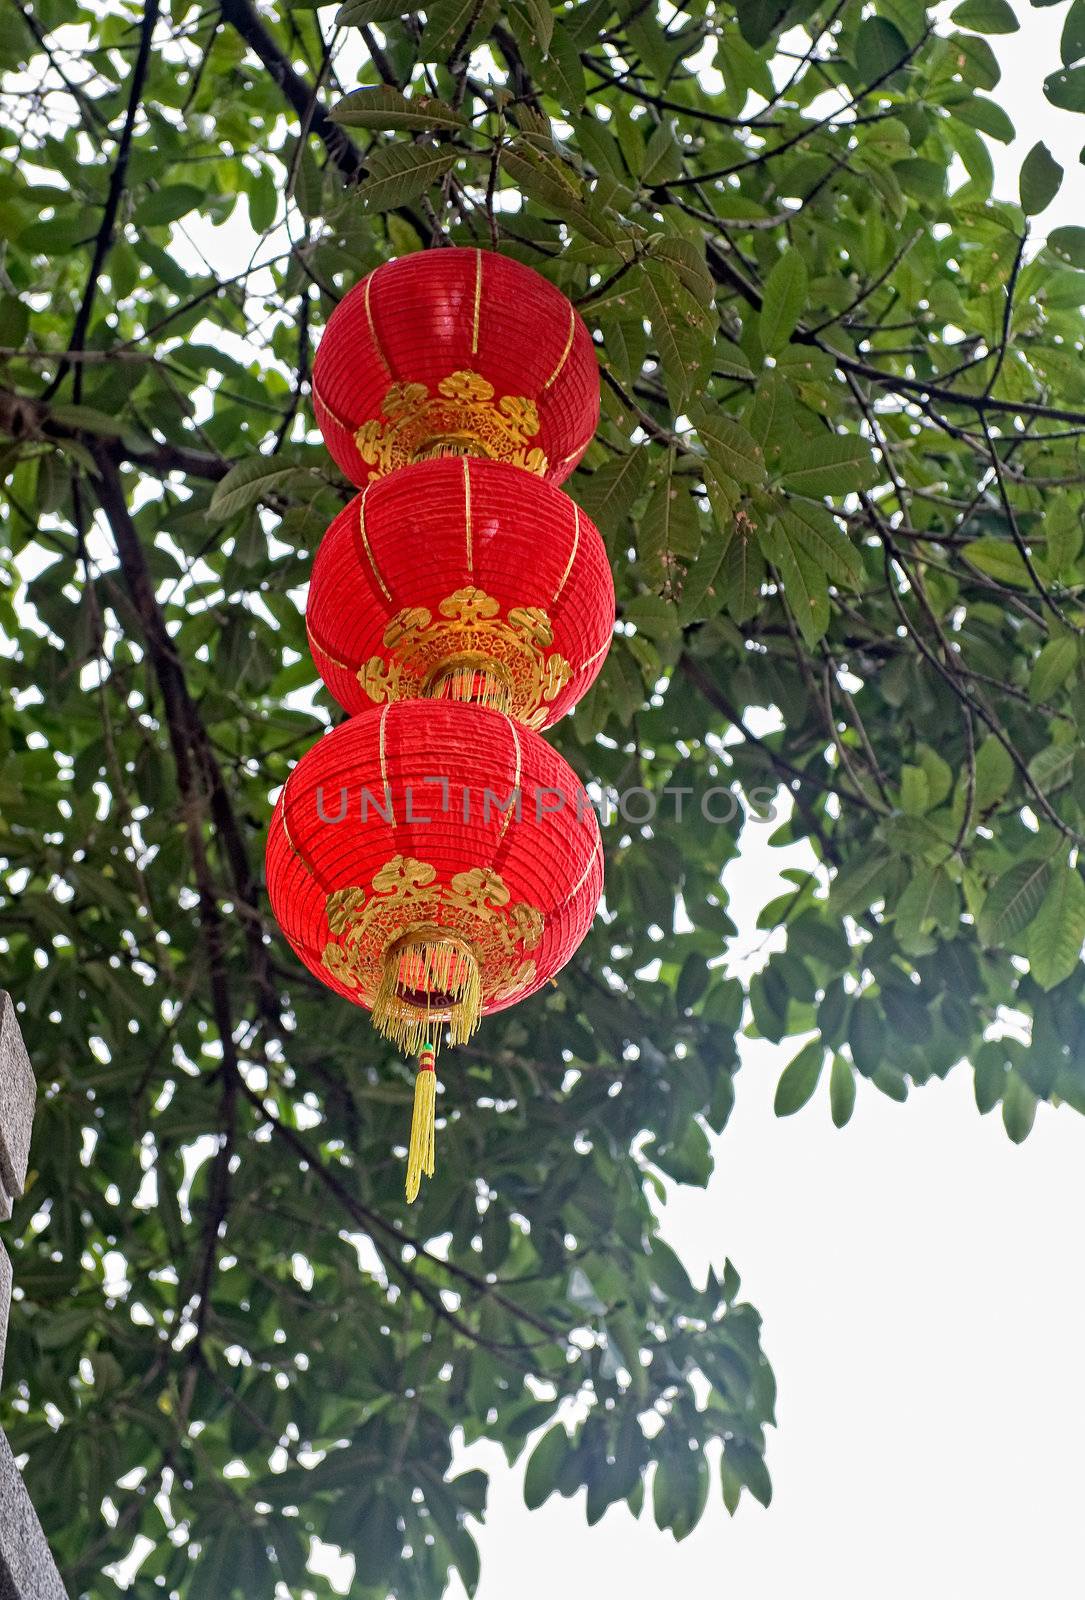 Decoration for Chinese new year, single red lantern blowing in the wind